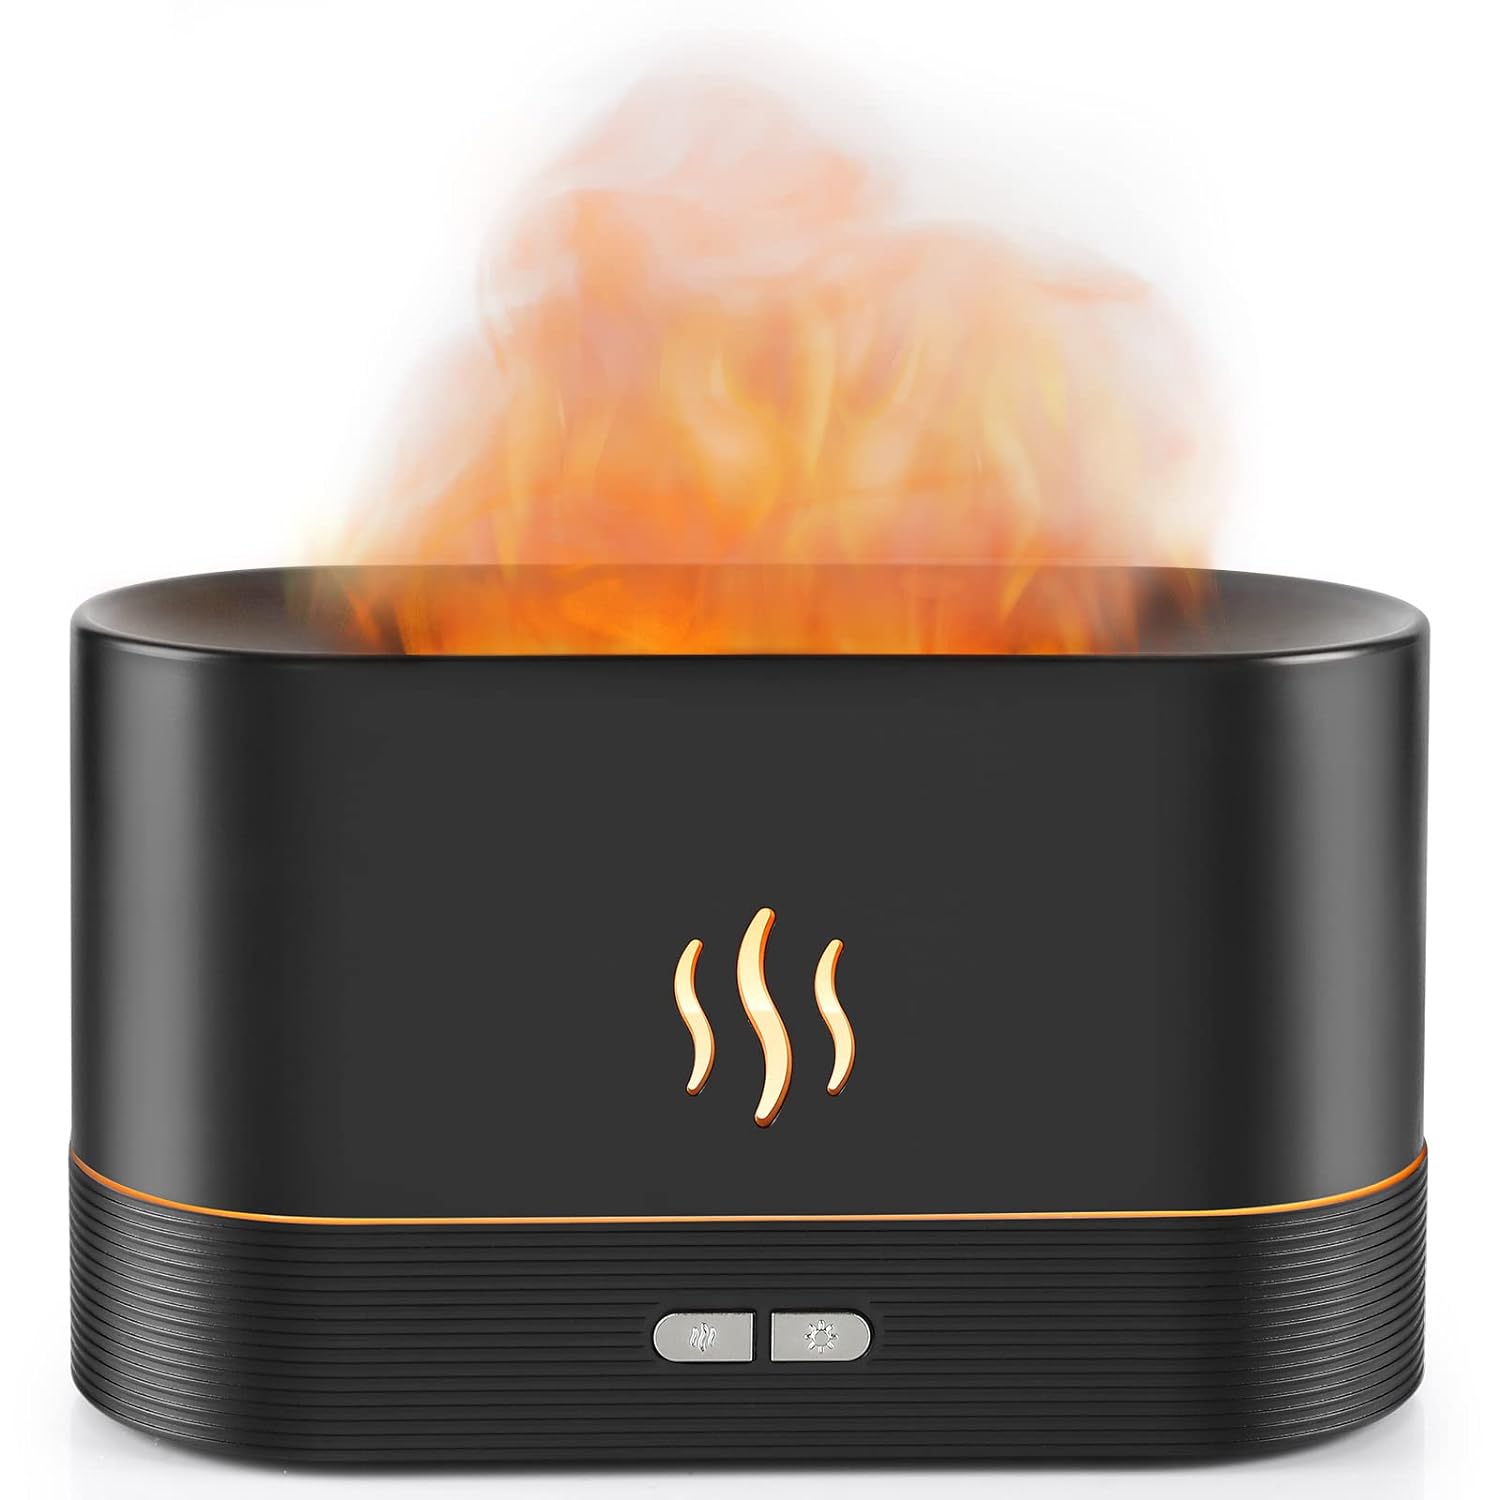 Flame aroma diffuser